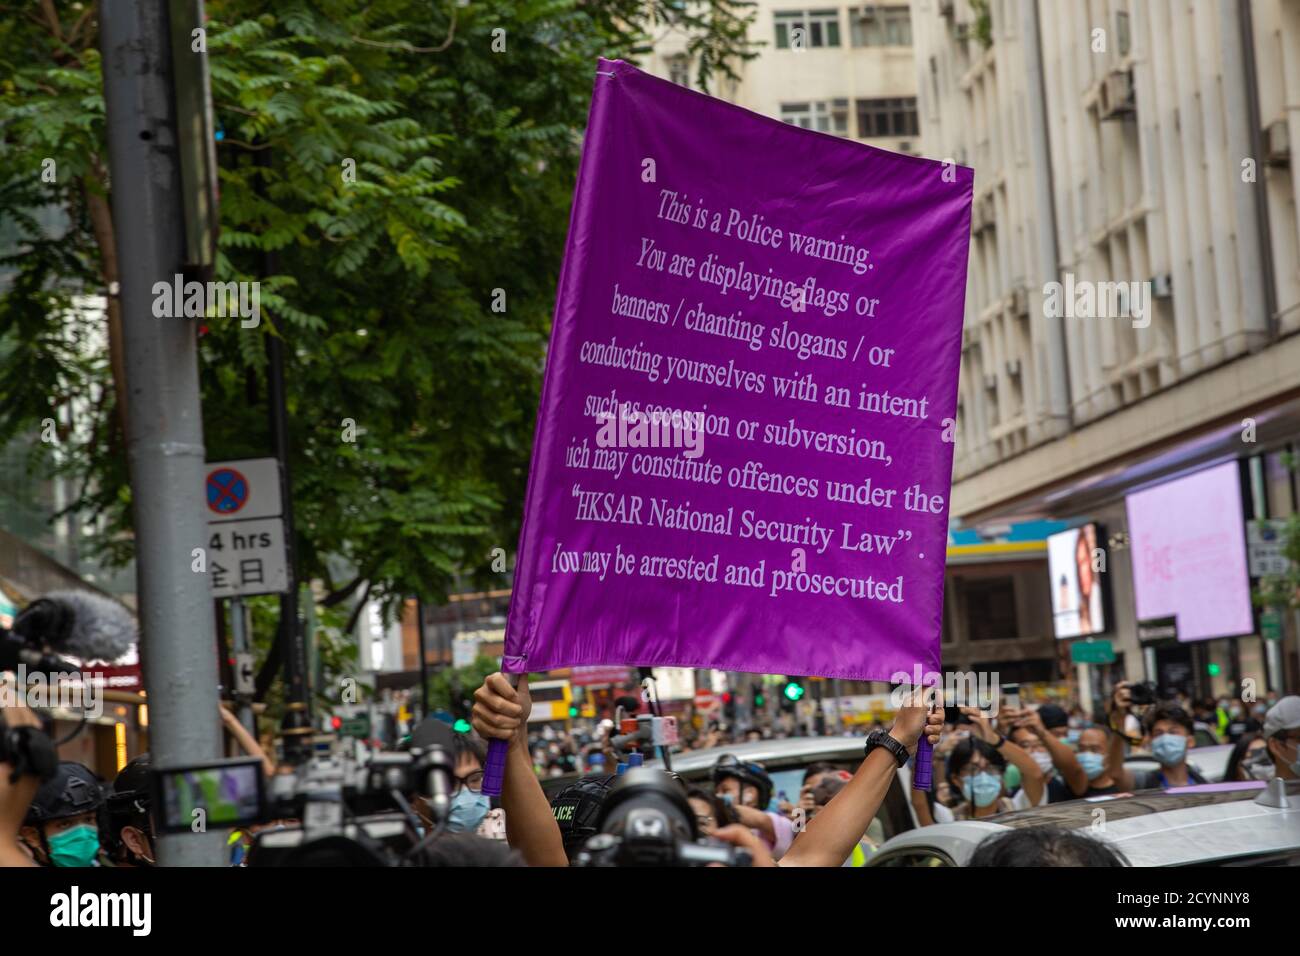 Hong Kong, Hong Kong. 01st Oct, 2020. Hong Kong Pro Democracy protesters took to the streets on China's National Day police raise a purple banner indicating that the people gathered are in breach of the national security law, in Hong Kong Hong Kong, S.A.R., October 01, 2020. Hong Kong National Security Law was imposed in July and Elections suspended (Photo by Simon Jankowski/Sipa USA) Credit: Sipa USA/Alamy Live News Stock Photo